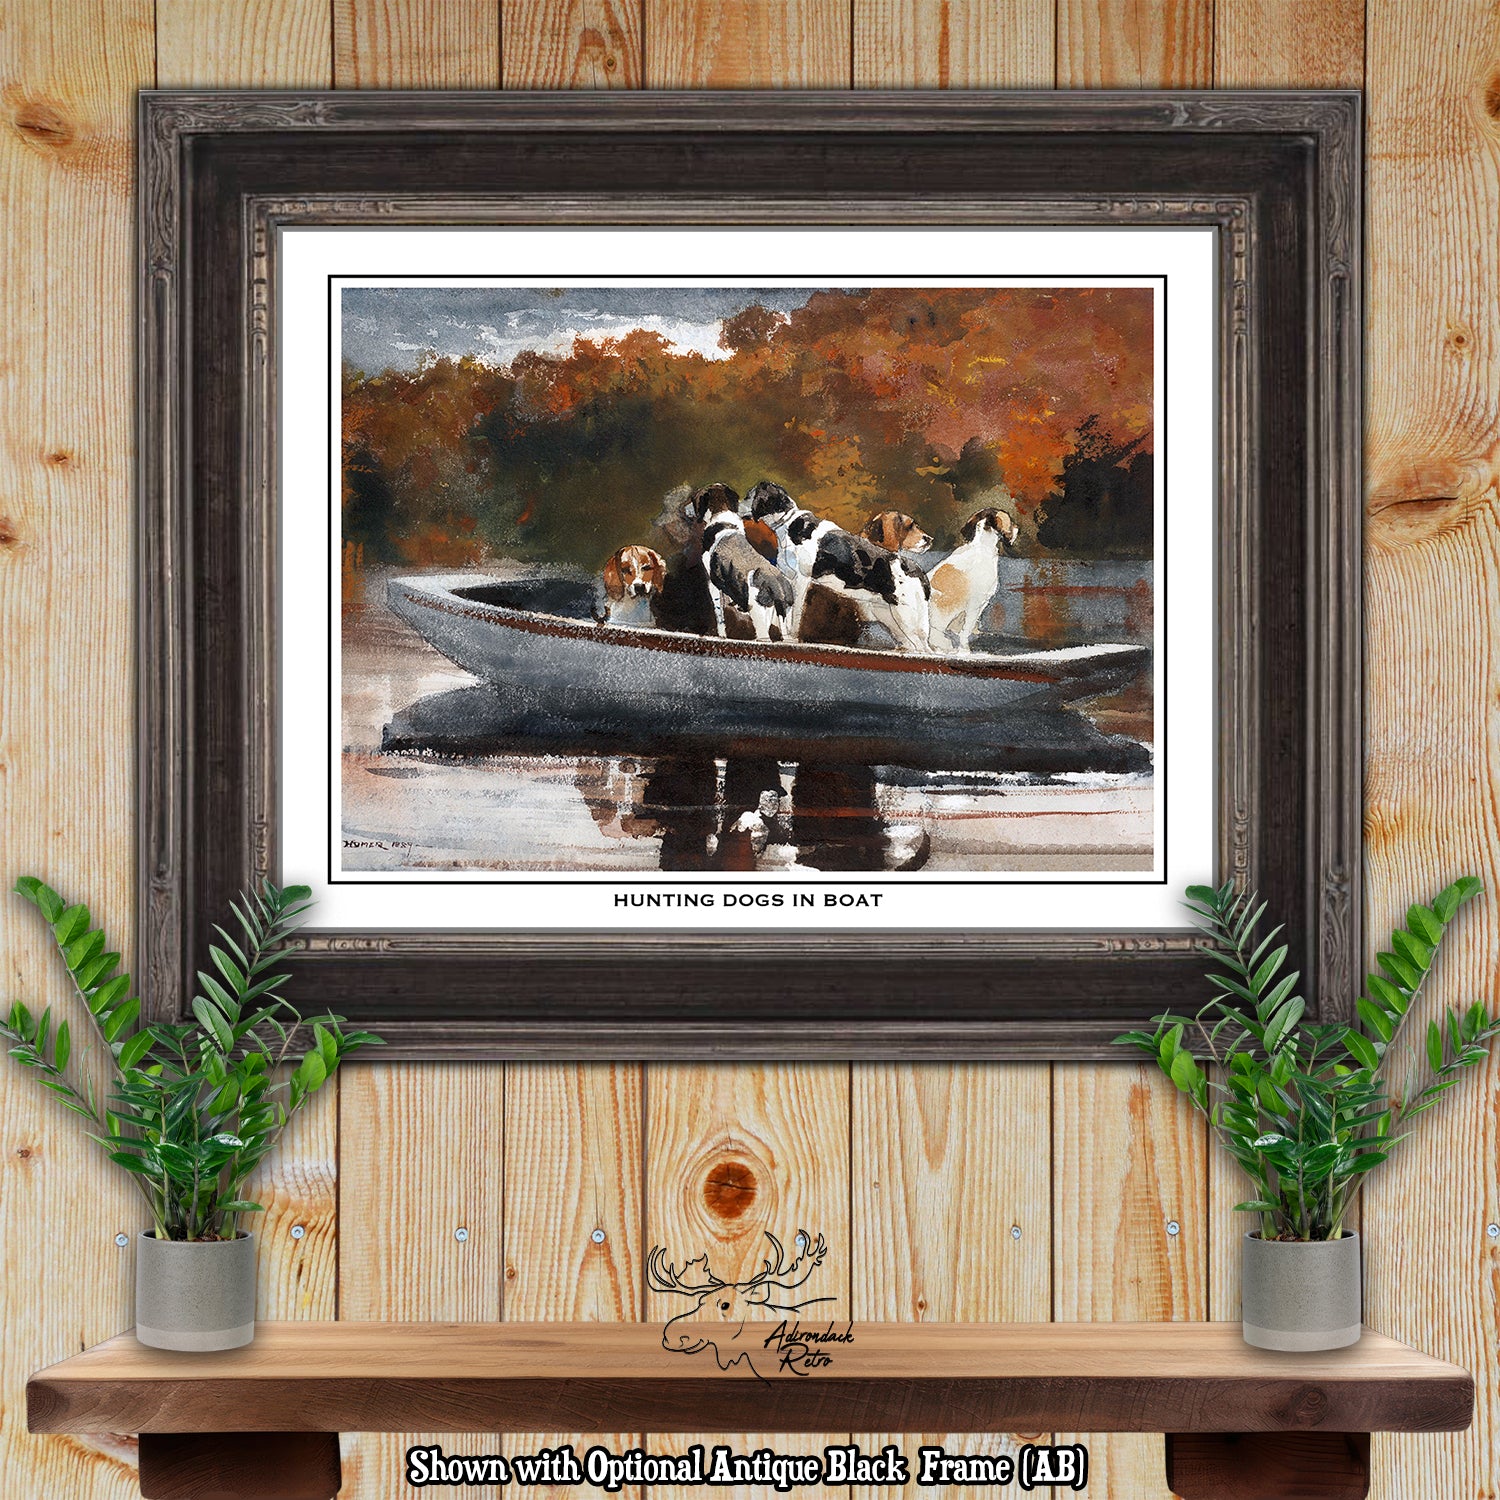 Hunting Dogs In Boat by Winslow Homer Fine Art Print at Adirondack Retro